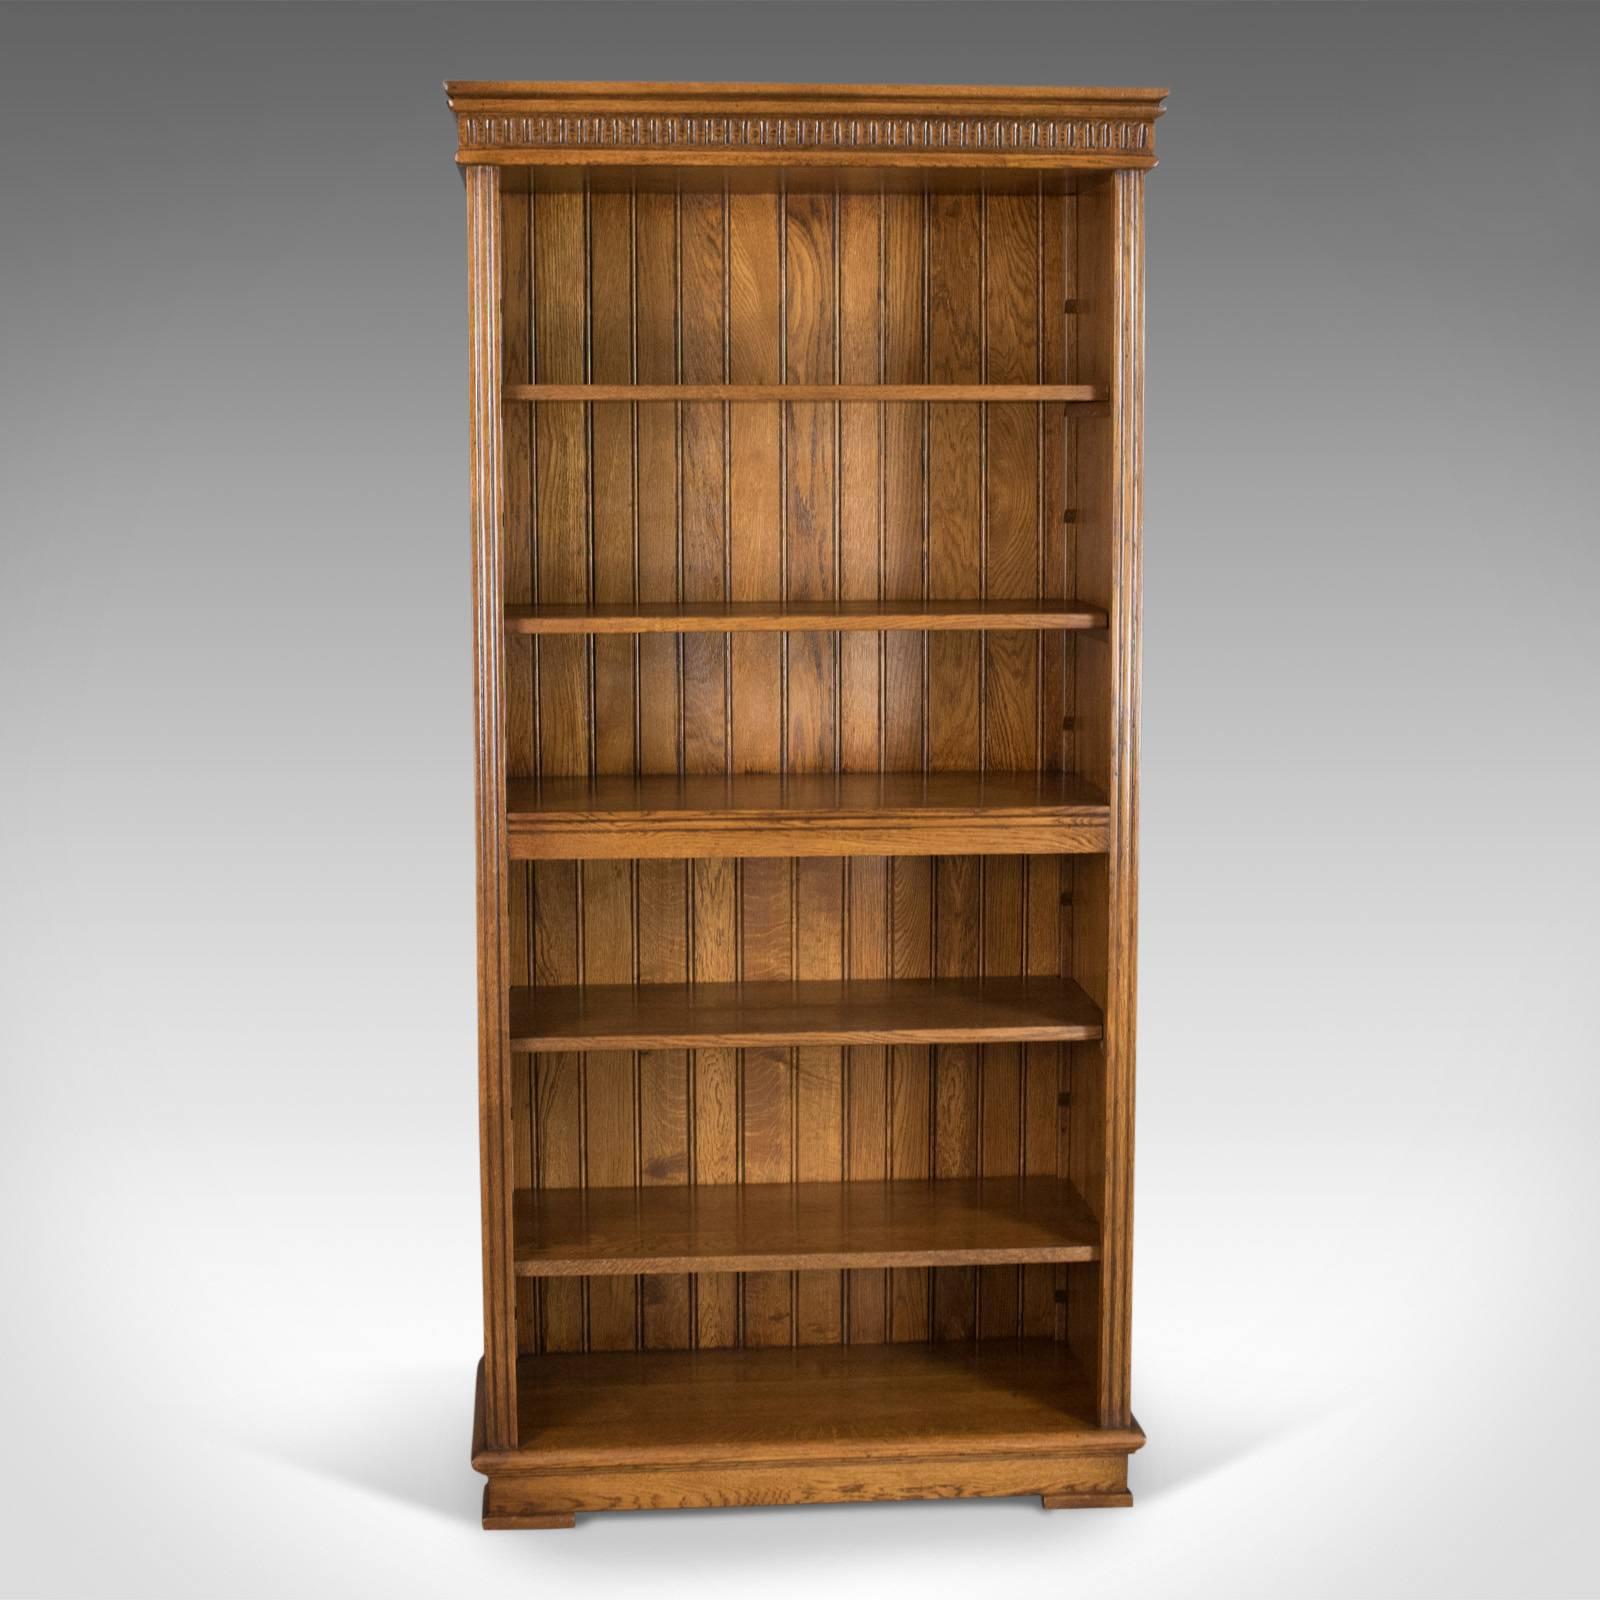 This is a mid-sized tall open bookcase with adjustable shelves in oak with gothic overtones dating to the late 20th century.

Oak with grain interest in the wax polished finish
Four adjustable shelves with one centre fixed shelf
Of quality